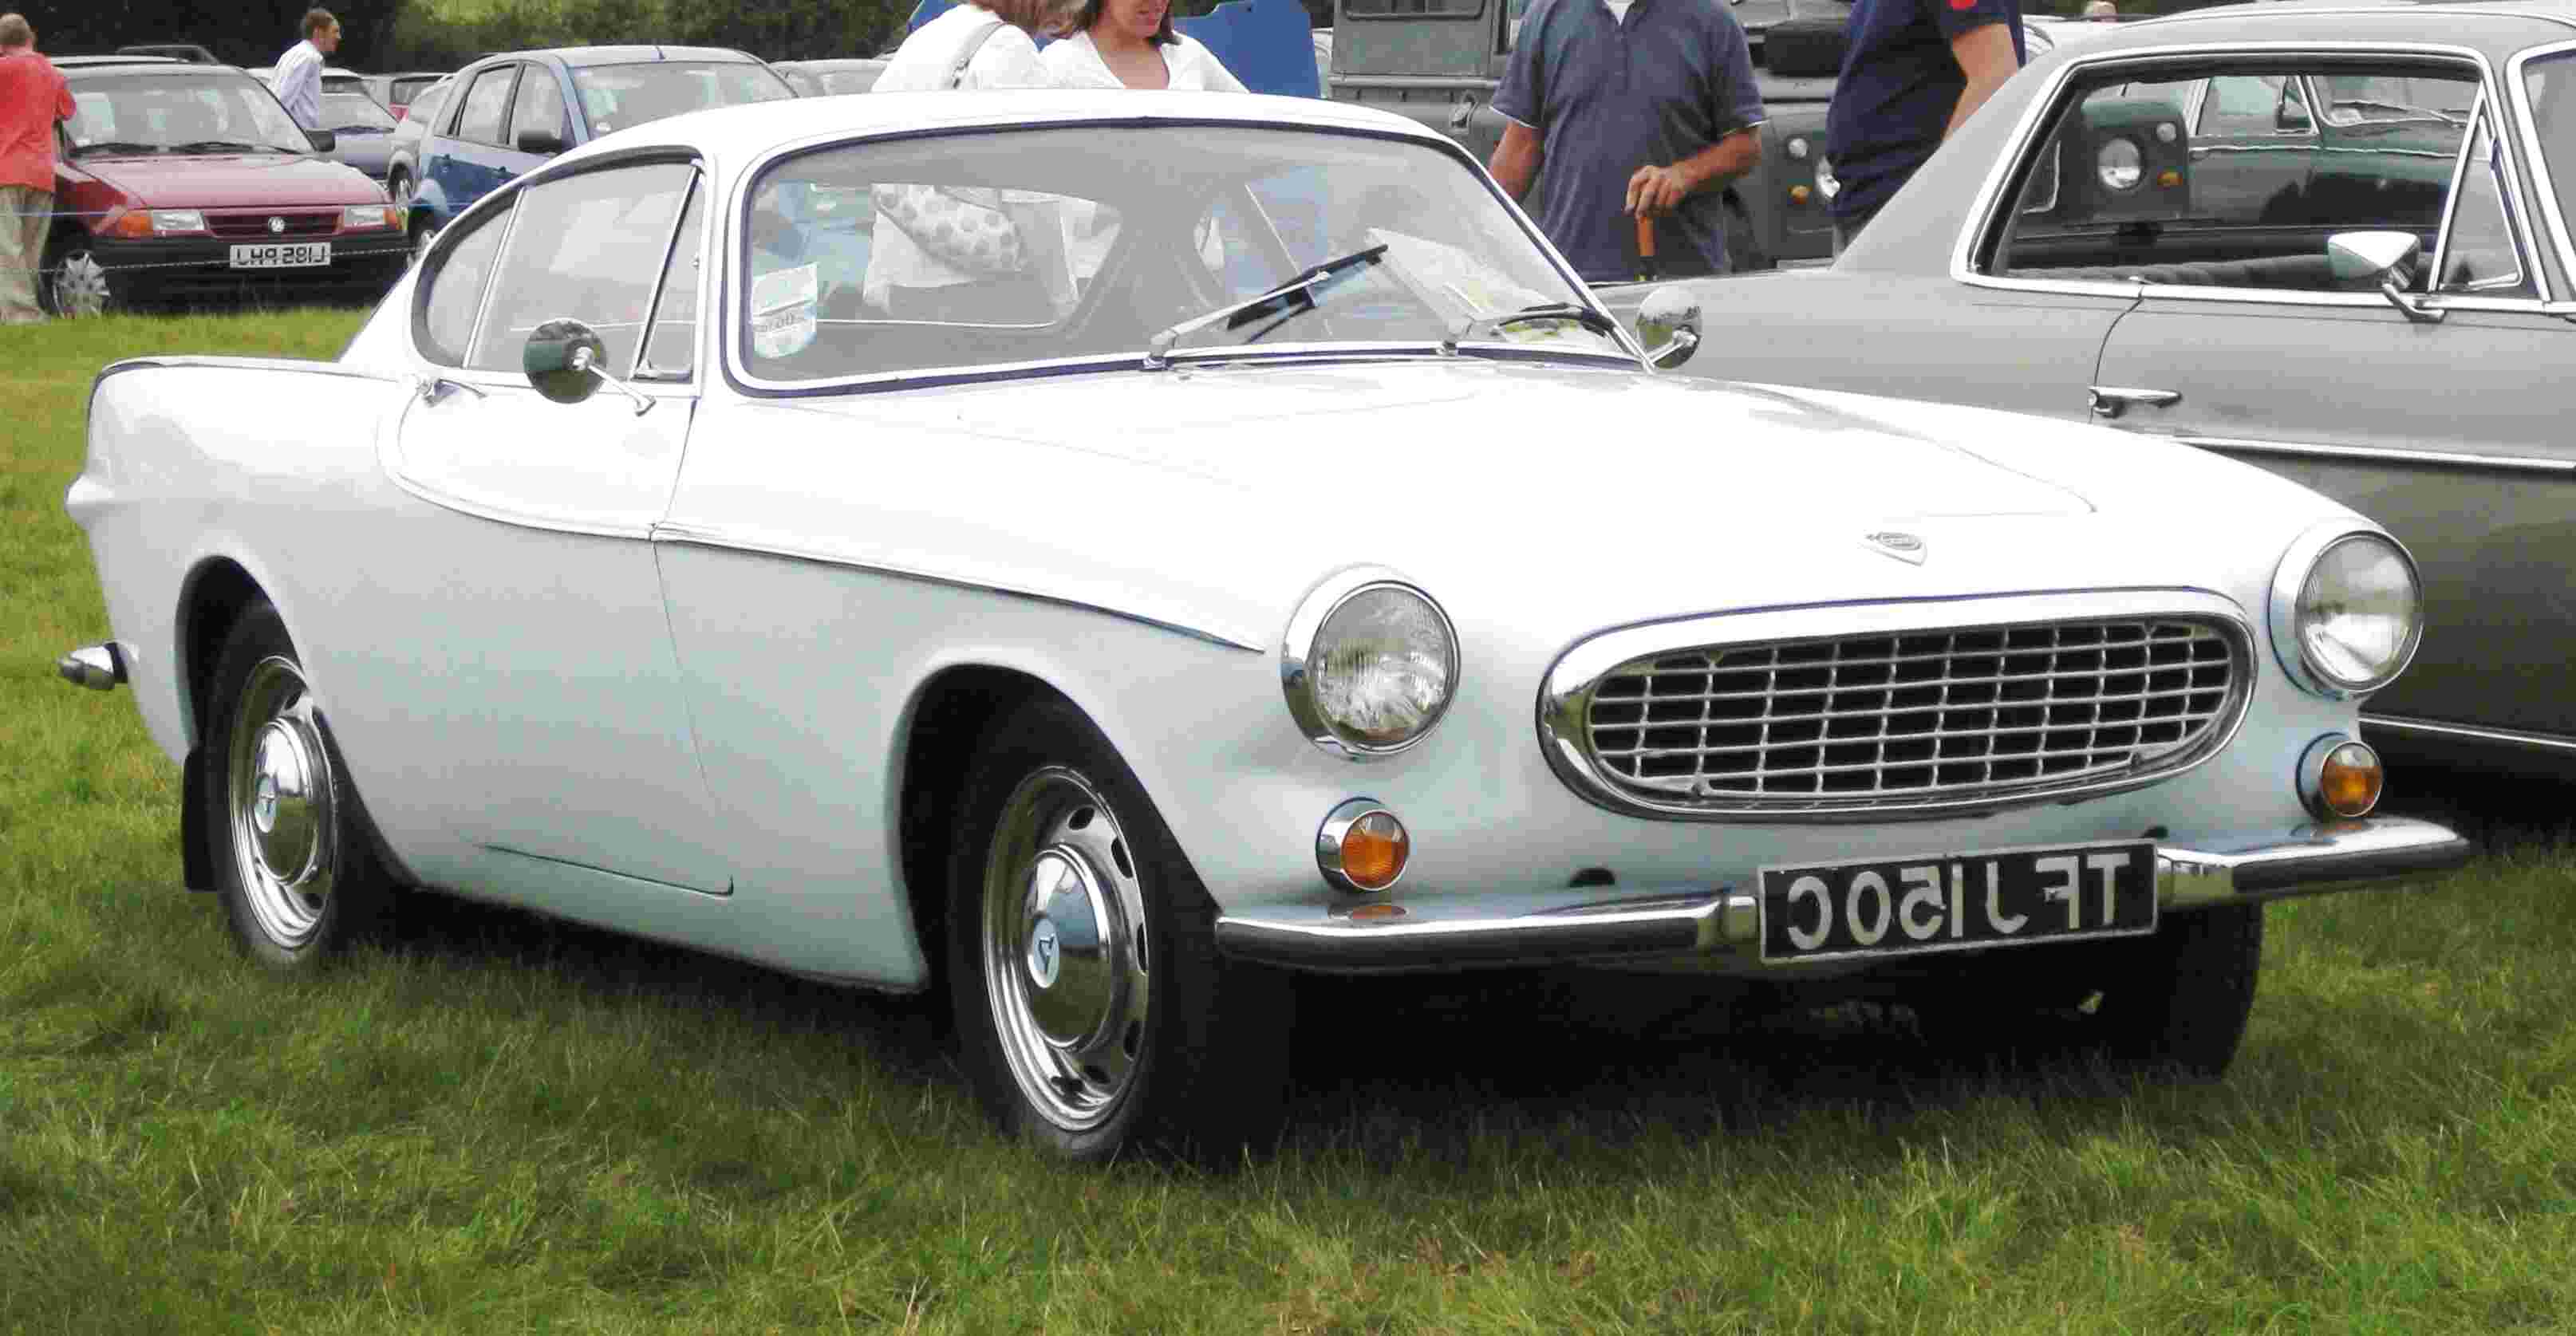 Classic Volvo P1800 for sale in UK View 57 bargains